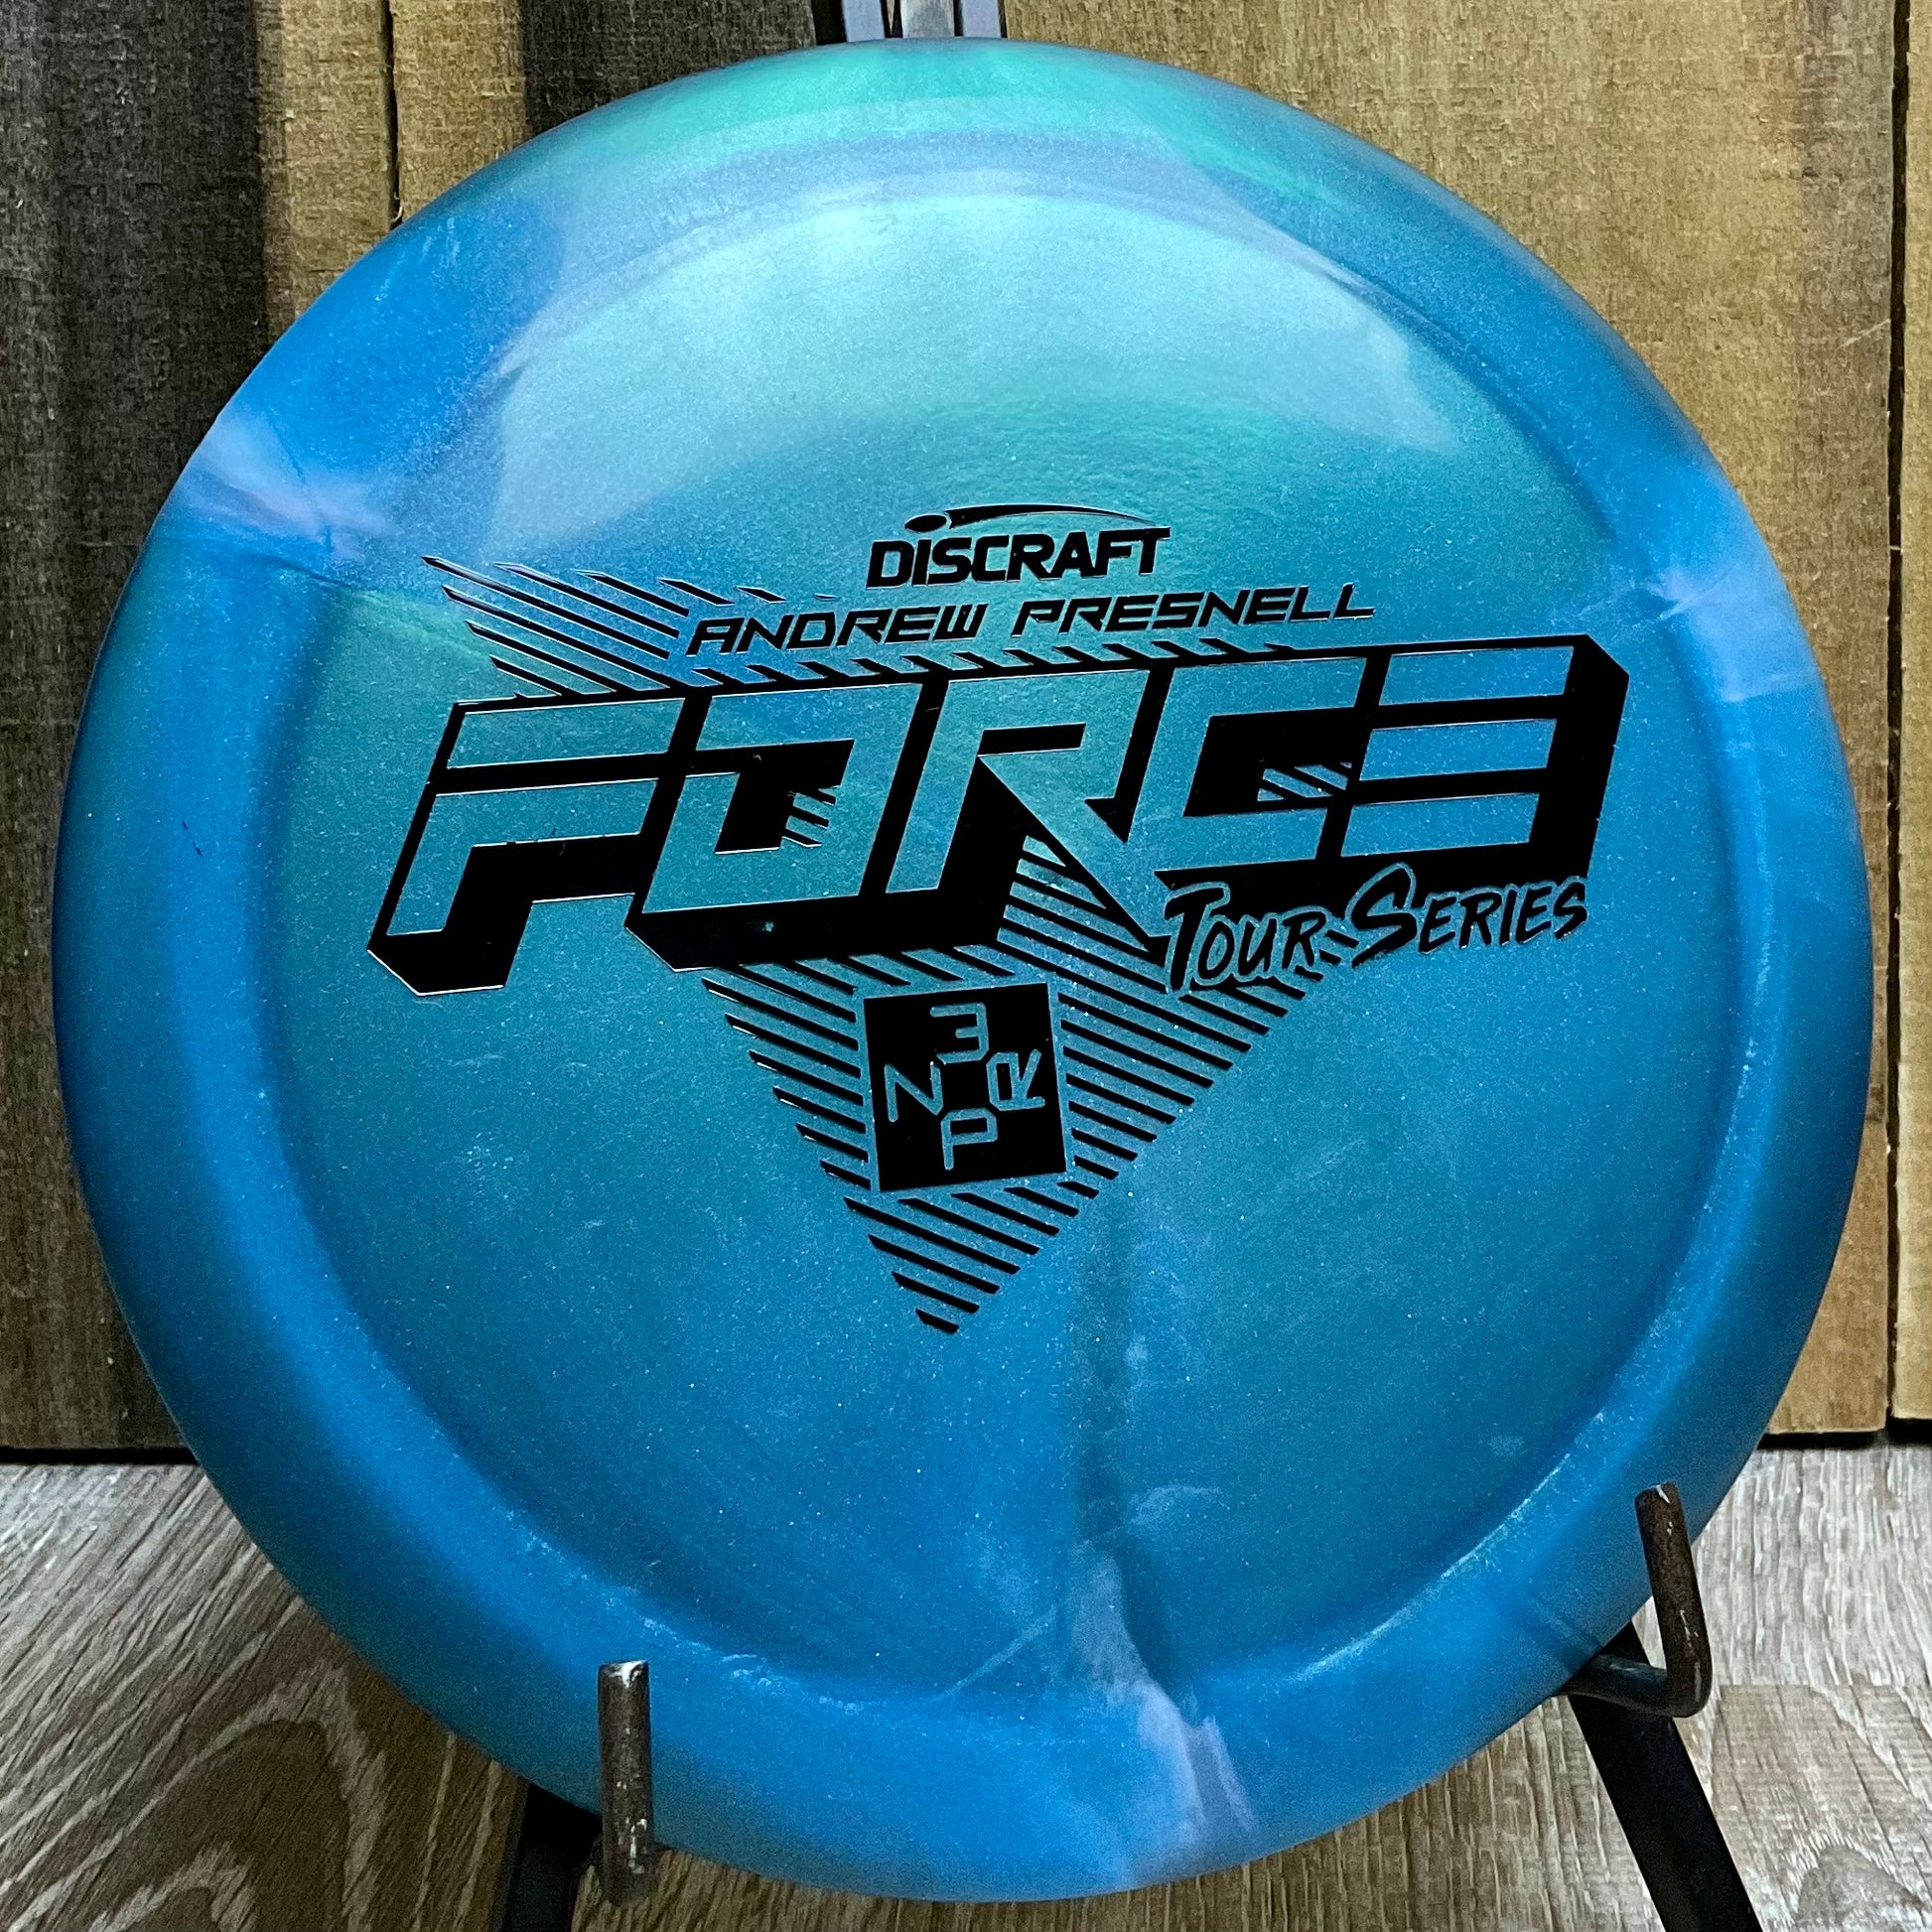 Discraft Force - 2022 Andrew Presnell Tour Series